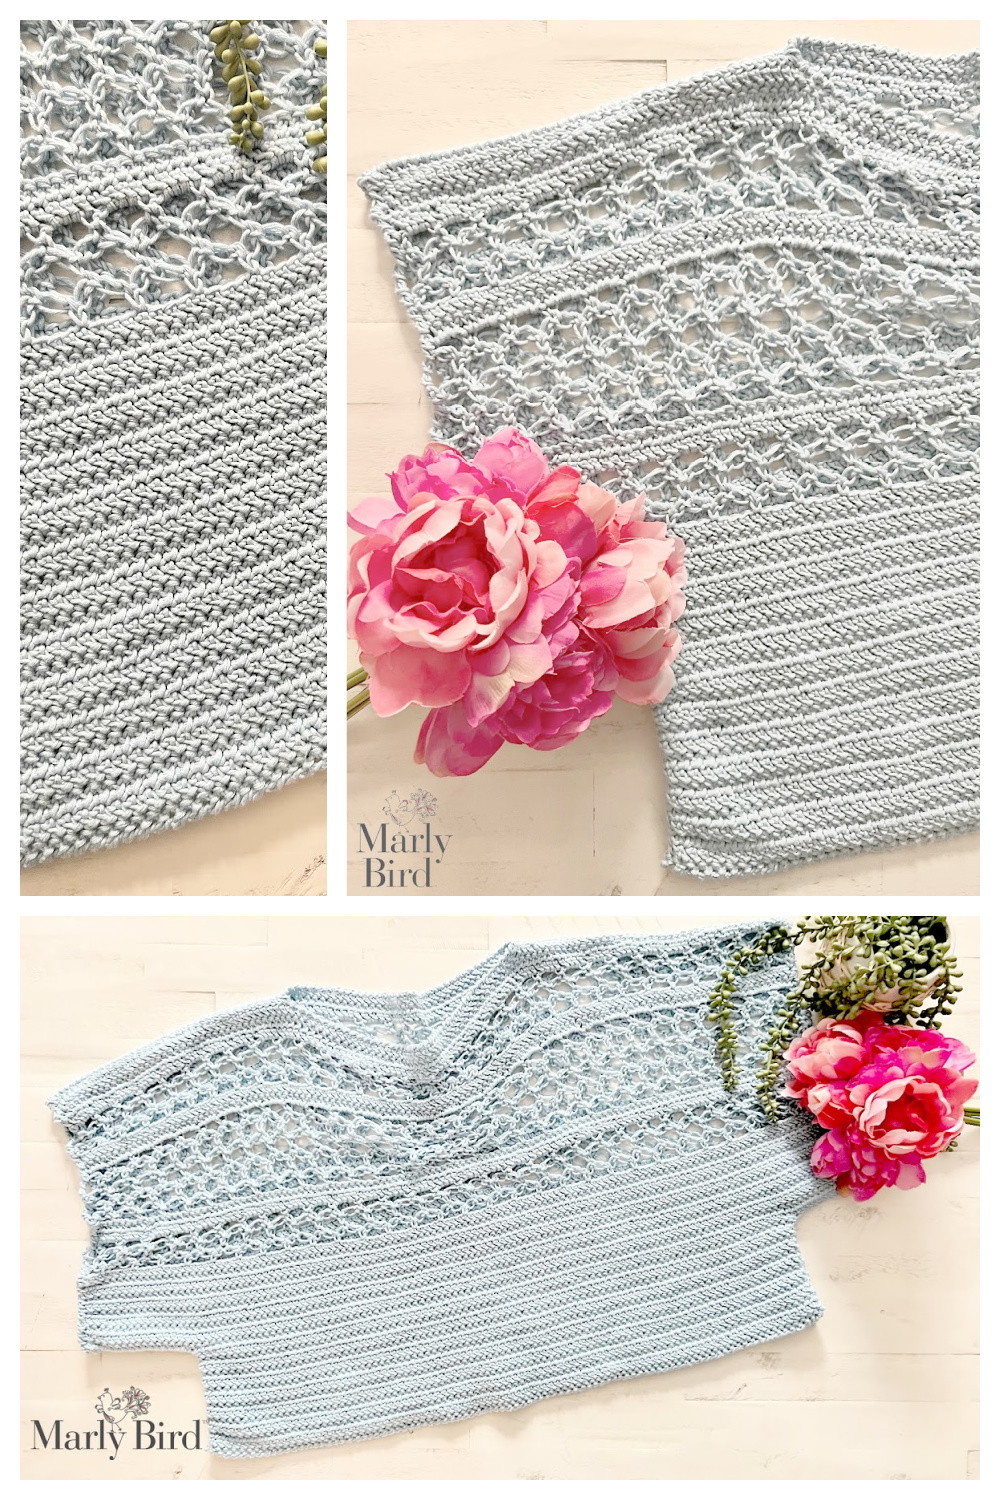 Soloman's Knot Crochet Tee in three different images. Full flat image on the bottom, and two close up images at the top. The crochet pullover pattern is shown in a light blue color of Bernat Softee Cotton yarn - Marly Bird